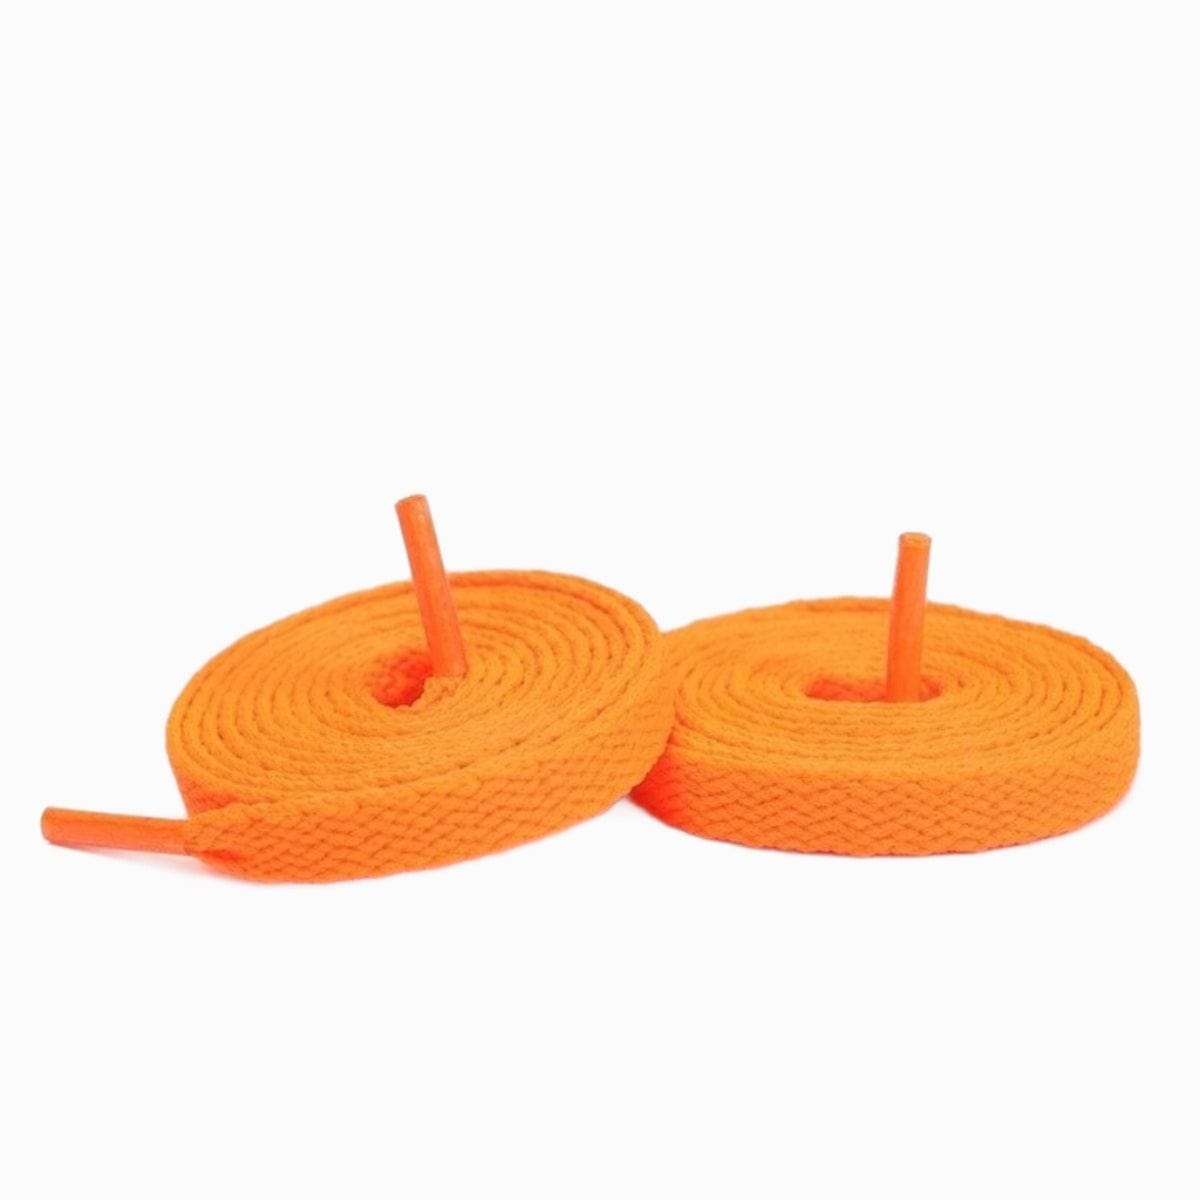 Orange Replacement Laces for Adidas Continental 80 Sneakers by Kicks Shoelaces